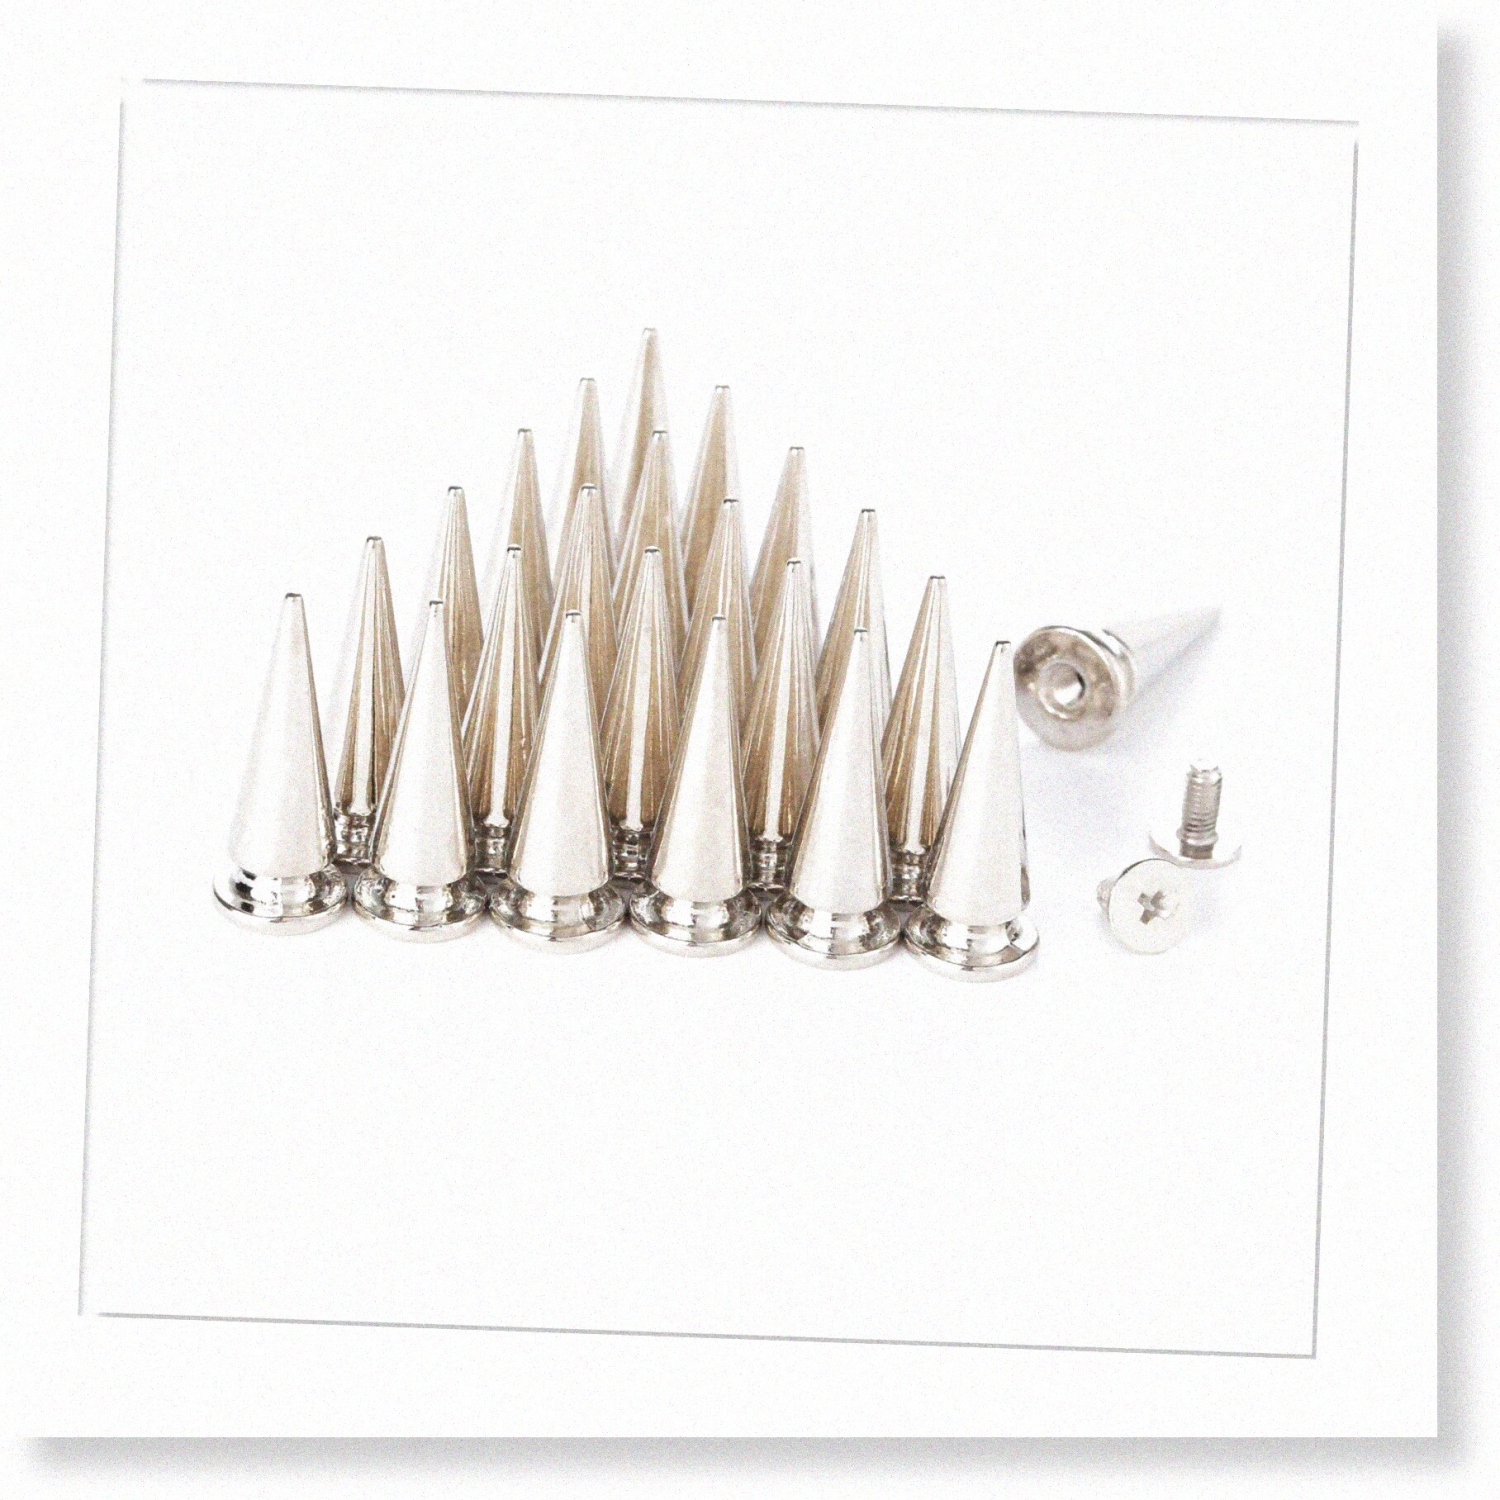 Silver Bullet Tree Spike Studs - 25MM Large Metal Rivets for DIY Leather Bag Clothing Shoes Belts - 20 Sets Spikes - Rapid Rivets Punk Accessories